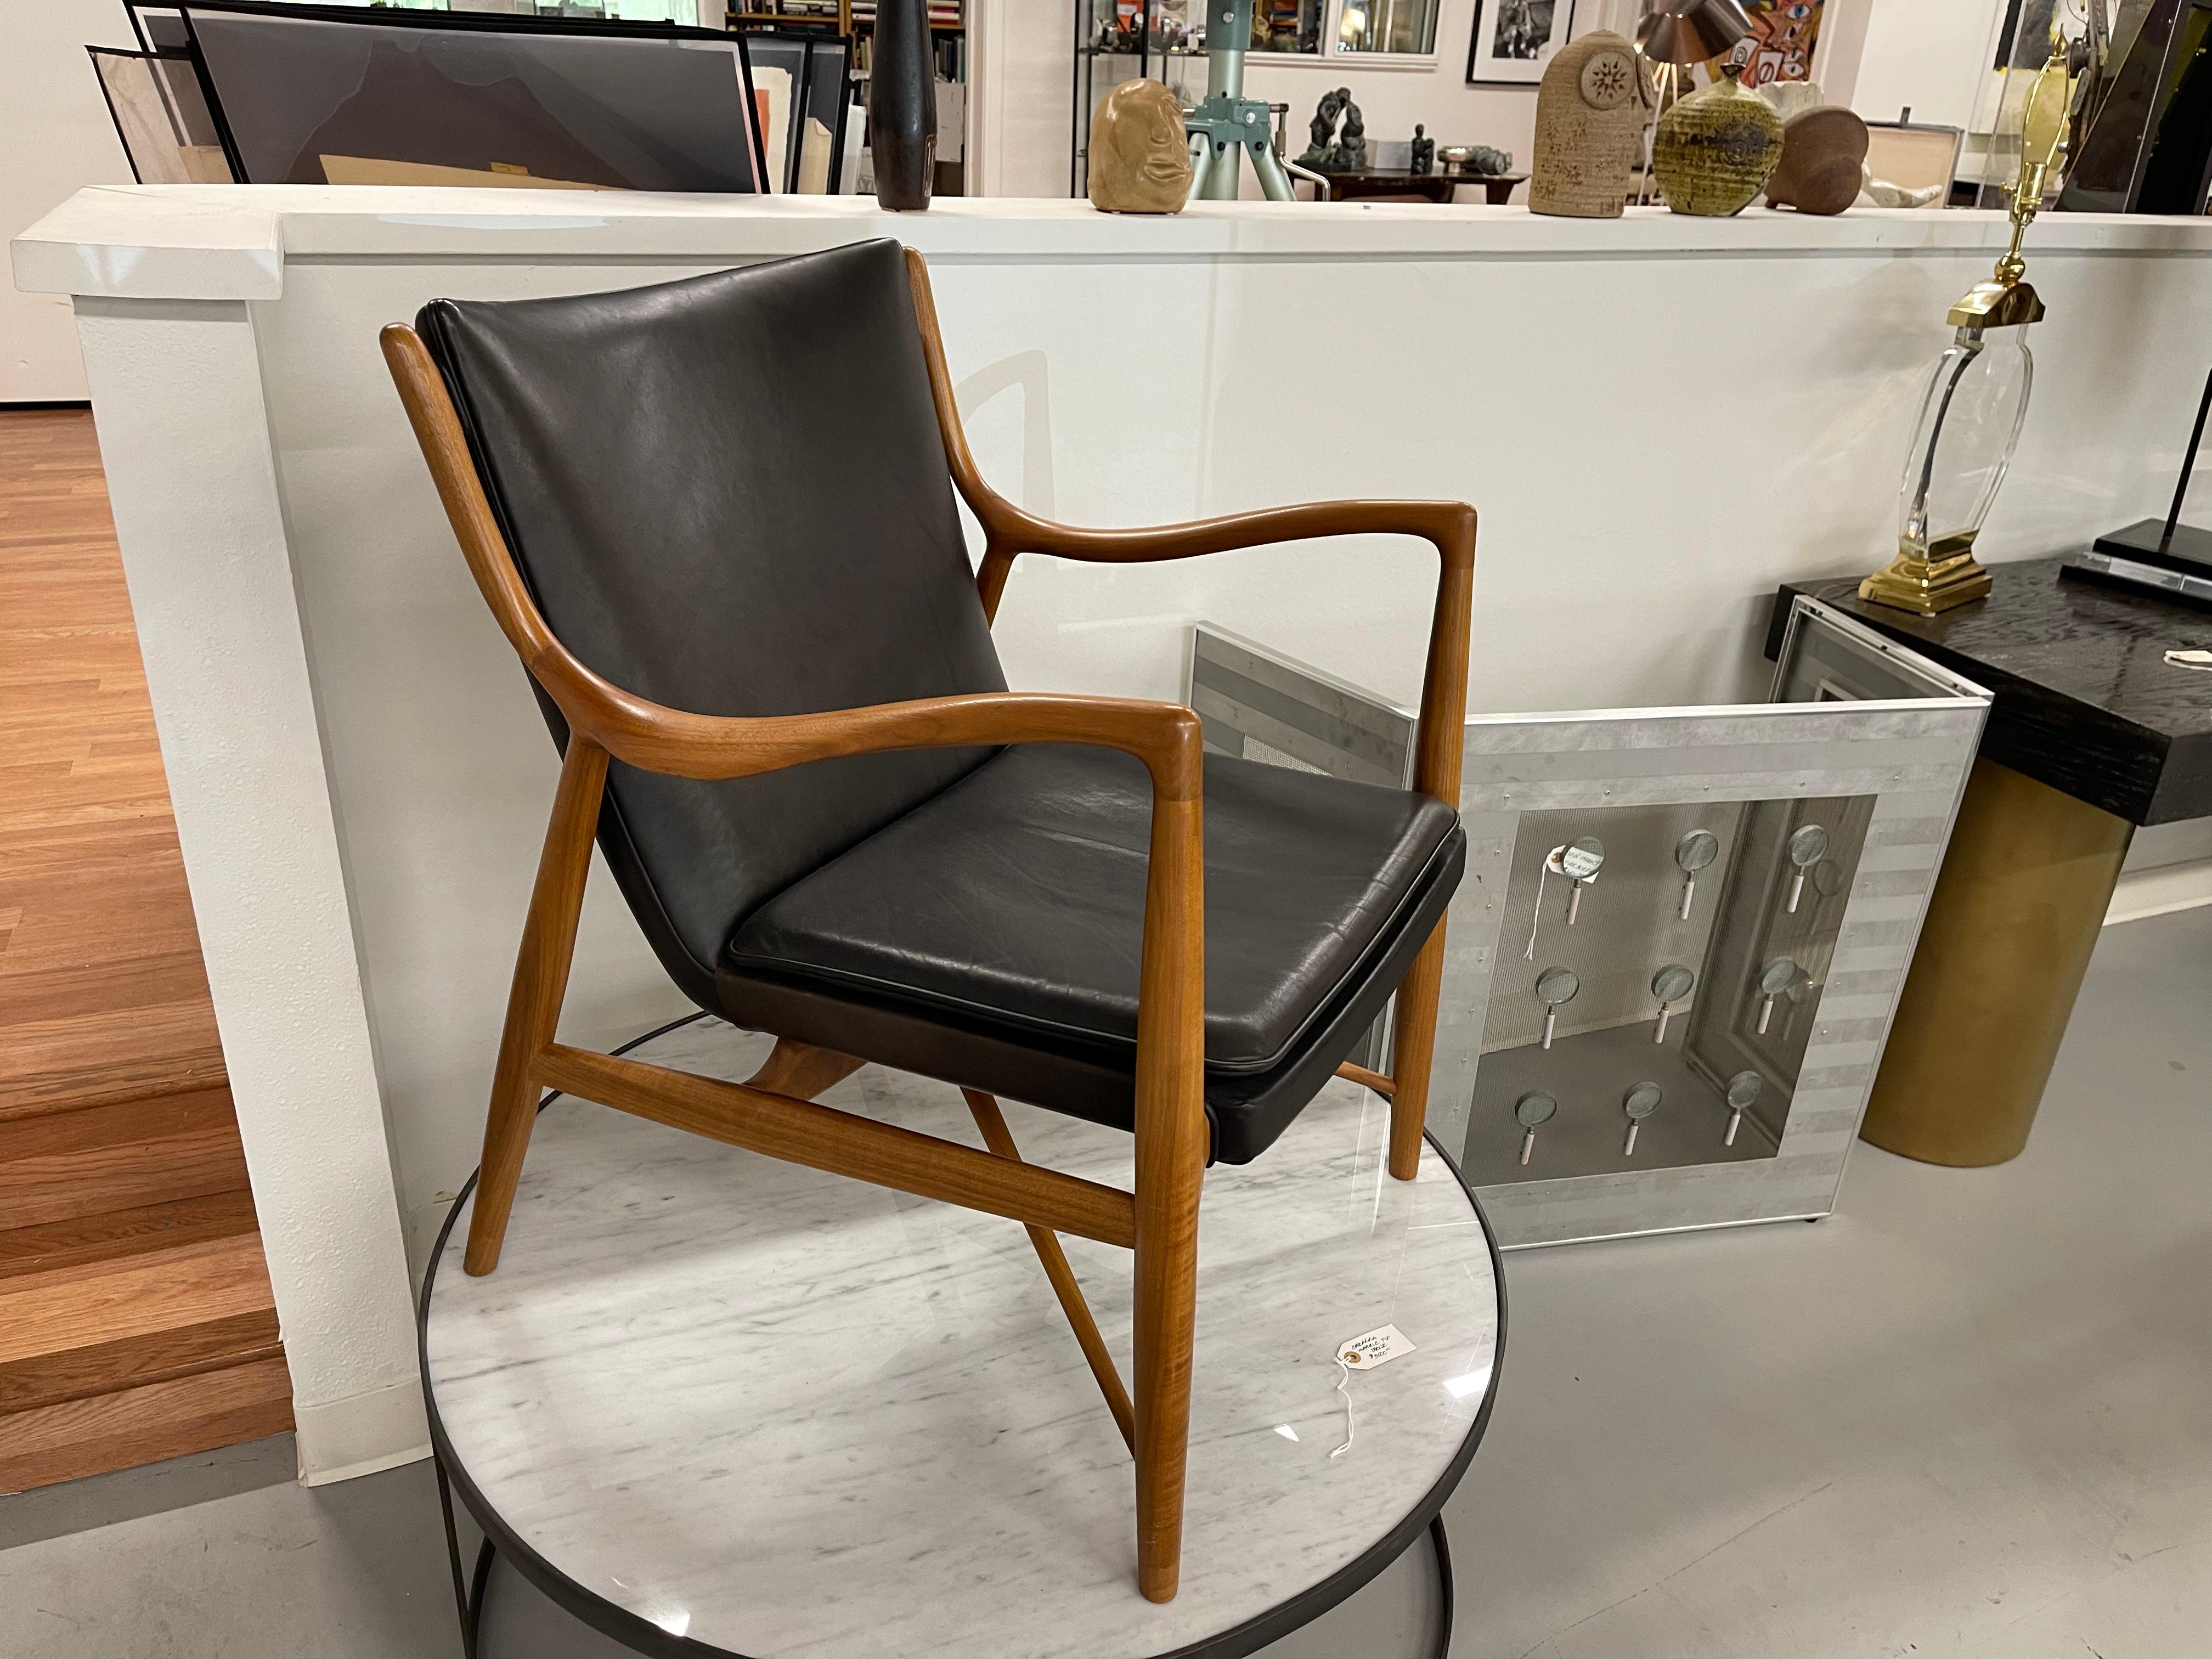 A House of Finn Juhl, one collection 45 chair in a high grade black leather. Has the house of Finn Juhl circular tag underneath. There are some marks to the frame and leather. There is a professionally repaired crack to one arm which is pictured. It